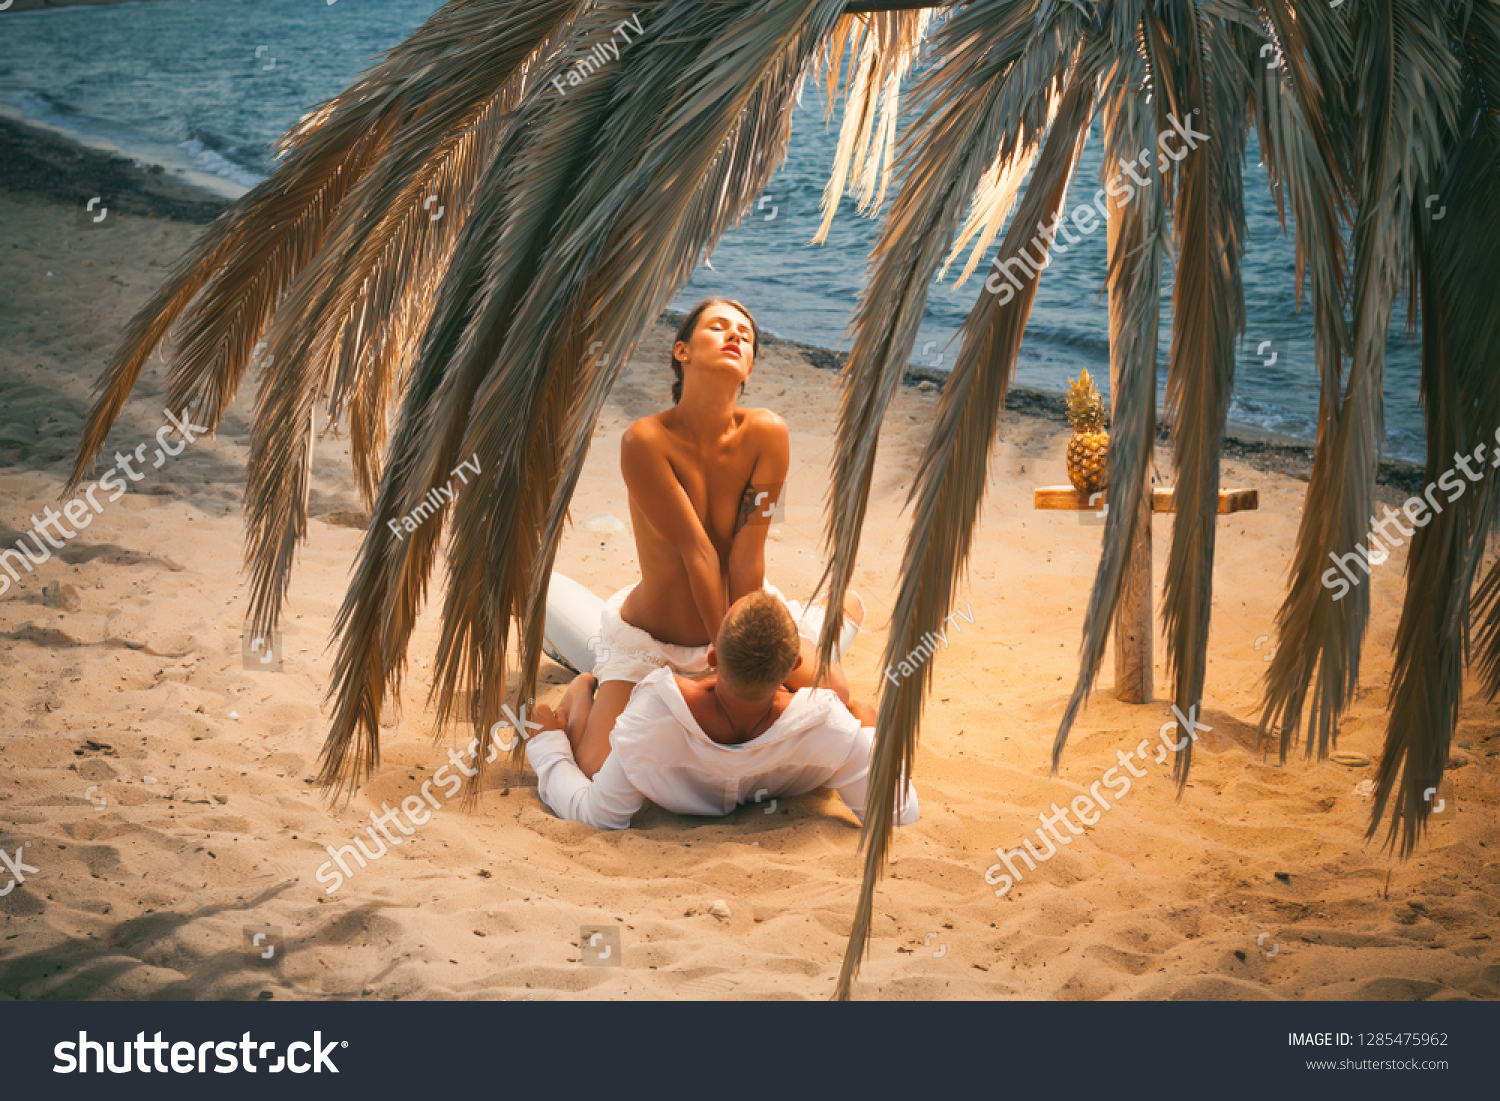 Real Sex On The Beach